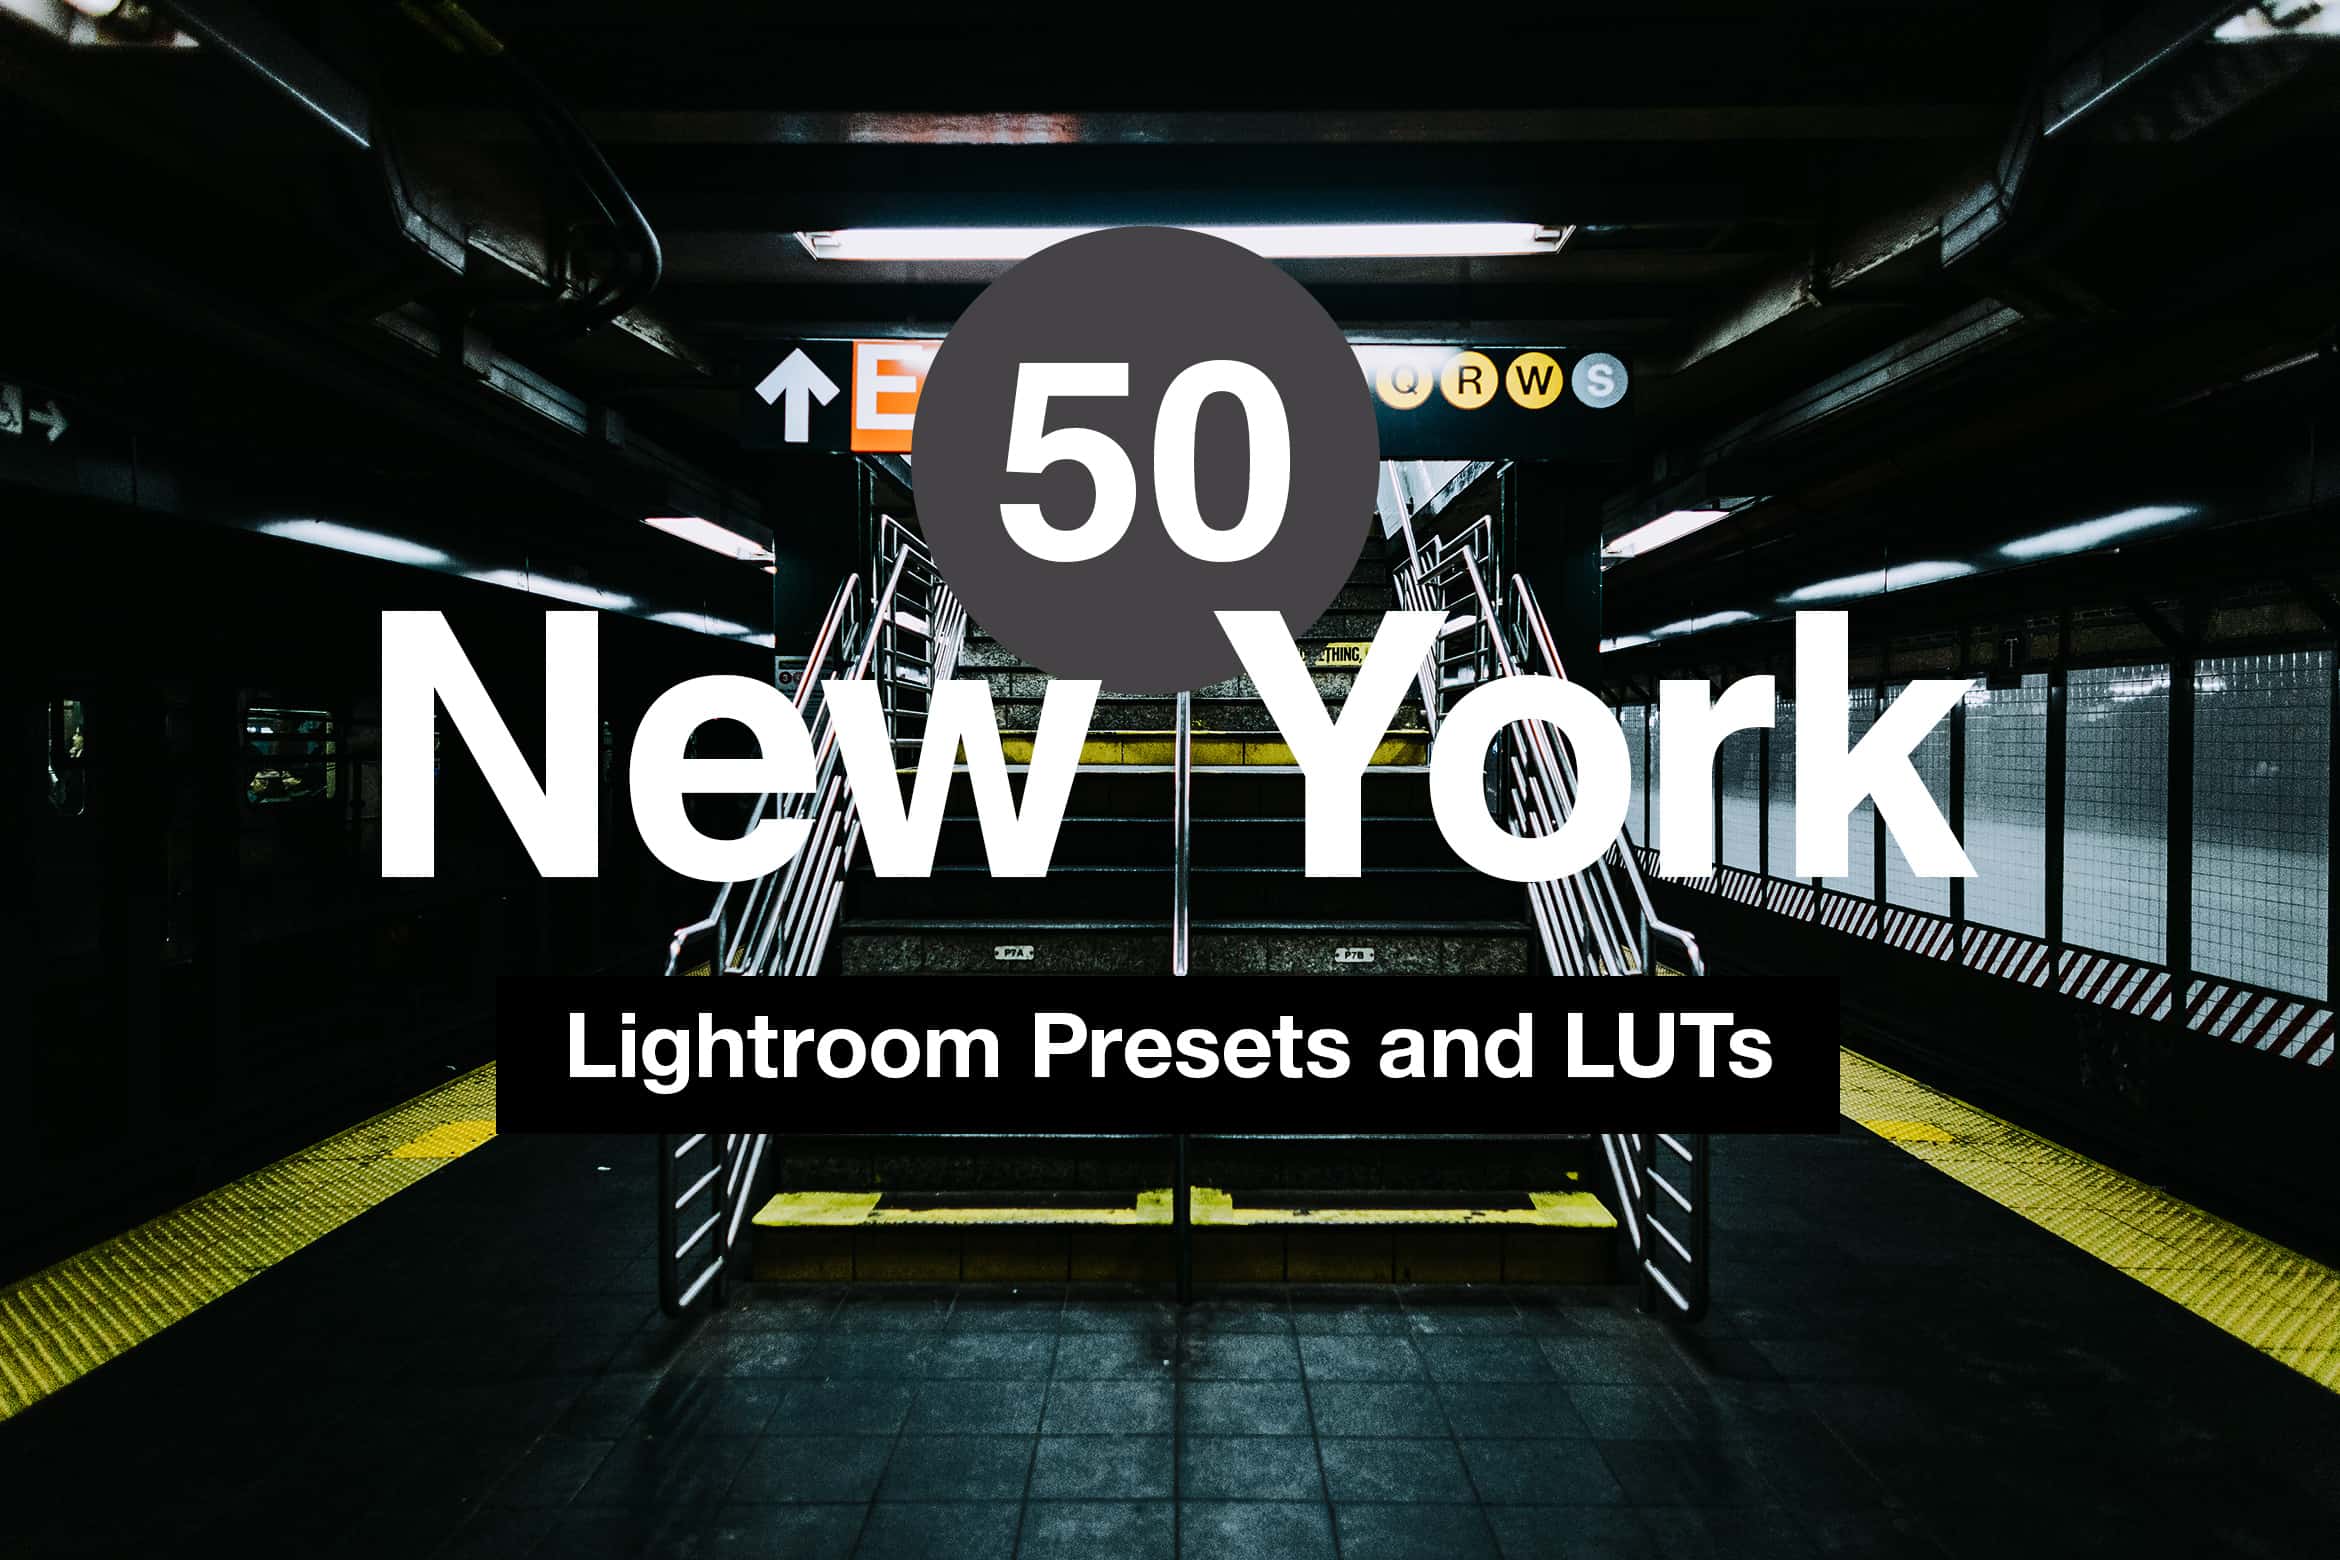 50 New York Lightroom Presets and LUTs